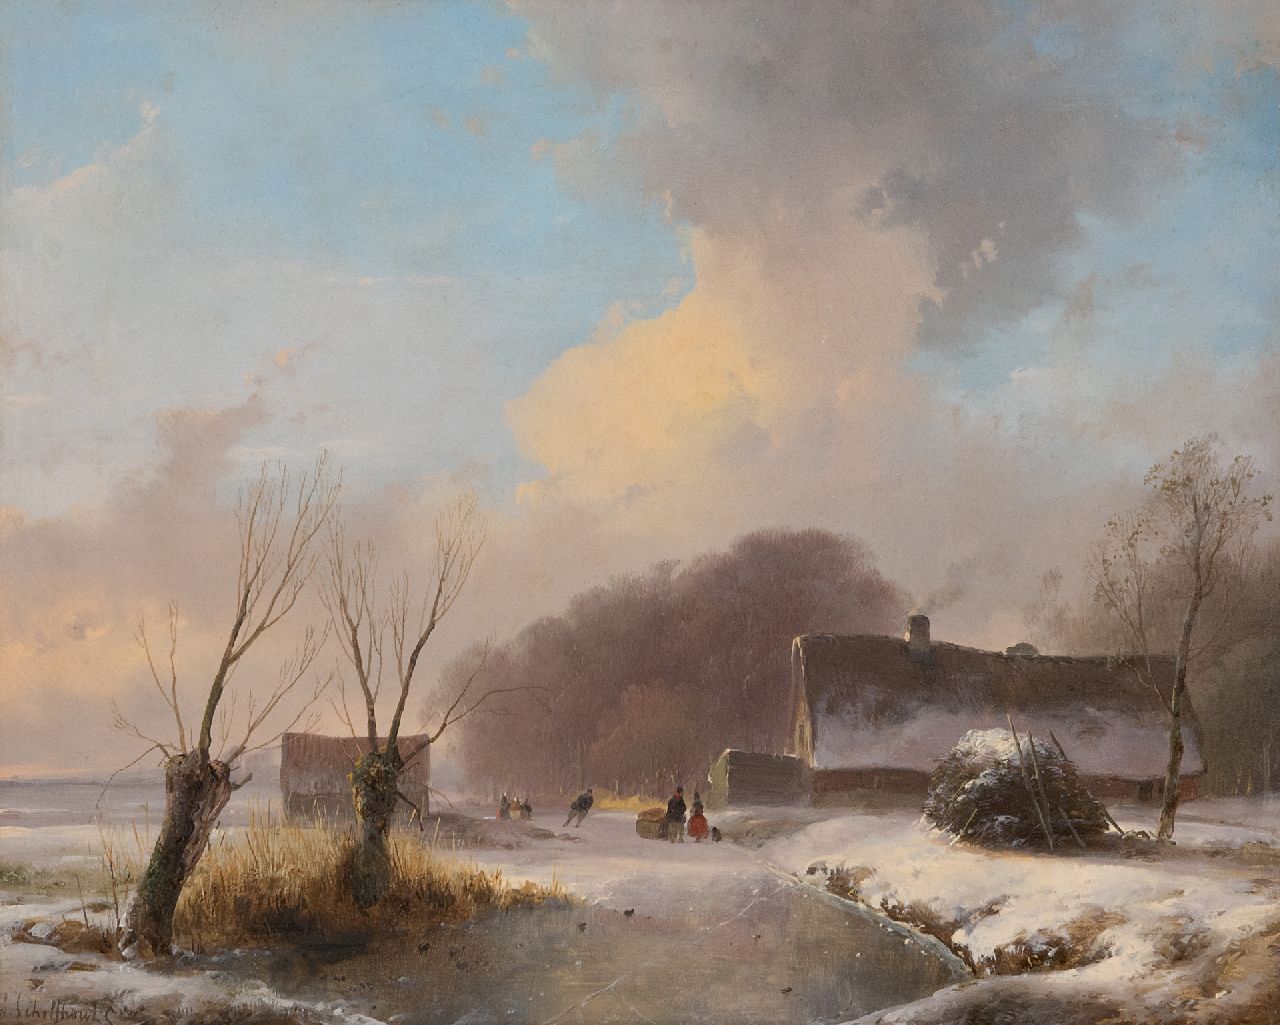 Schelfhout A.  | Andreas Schelfhout | Paintings offered for sale | Winter scene with approaching snowstorm, oil on panel 29.7 x 36.7 cm, signed l.l. and painted ca. 1833